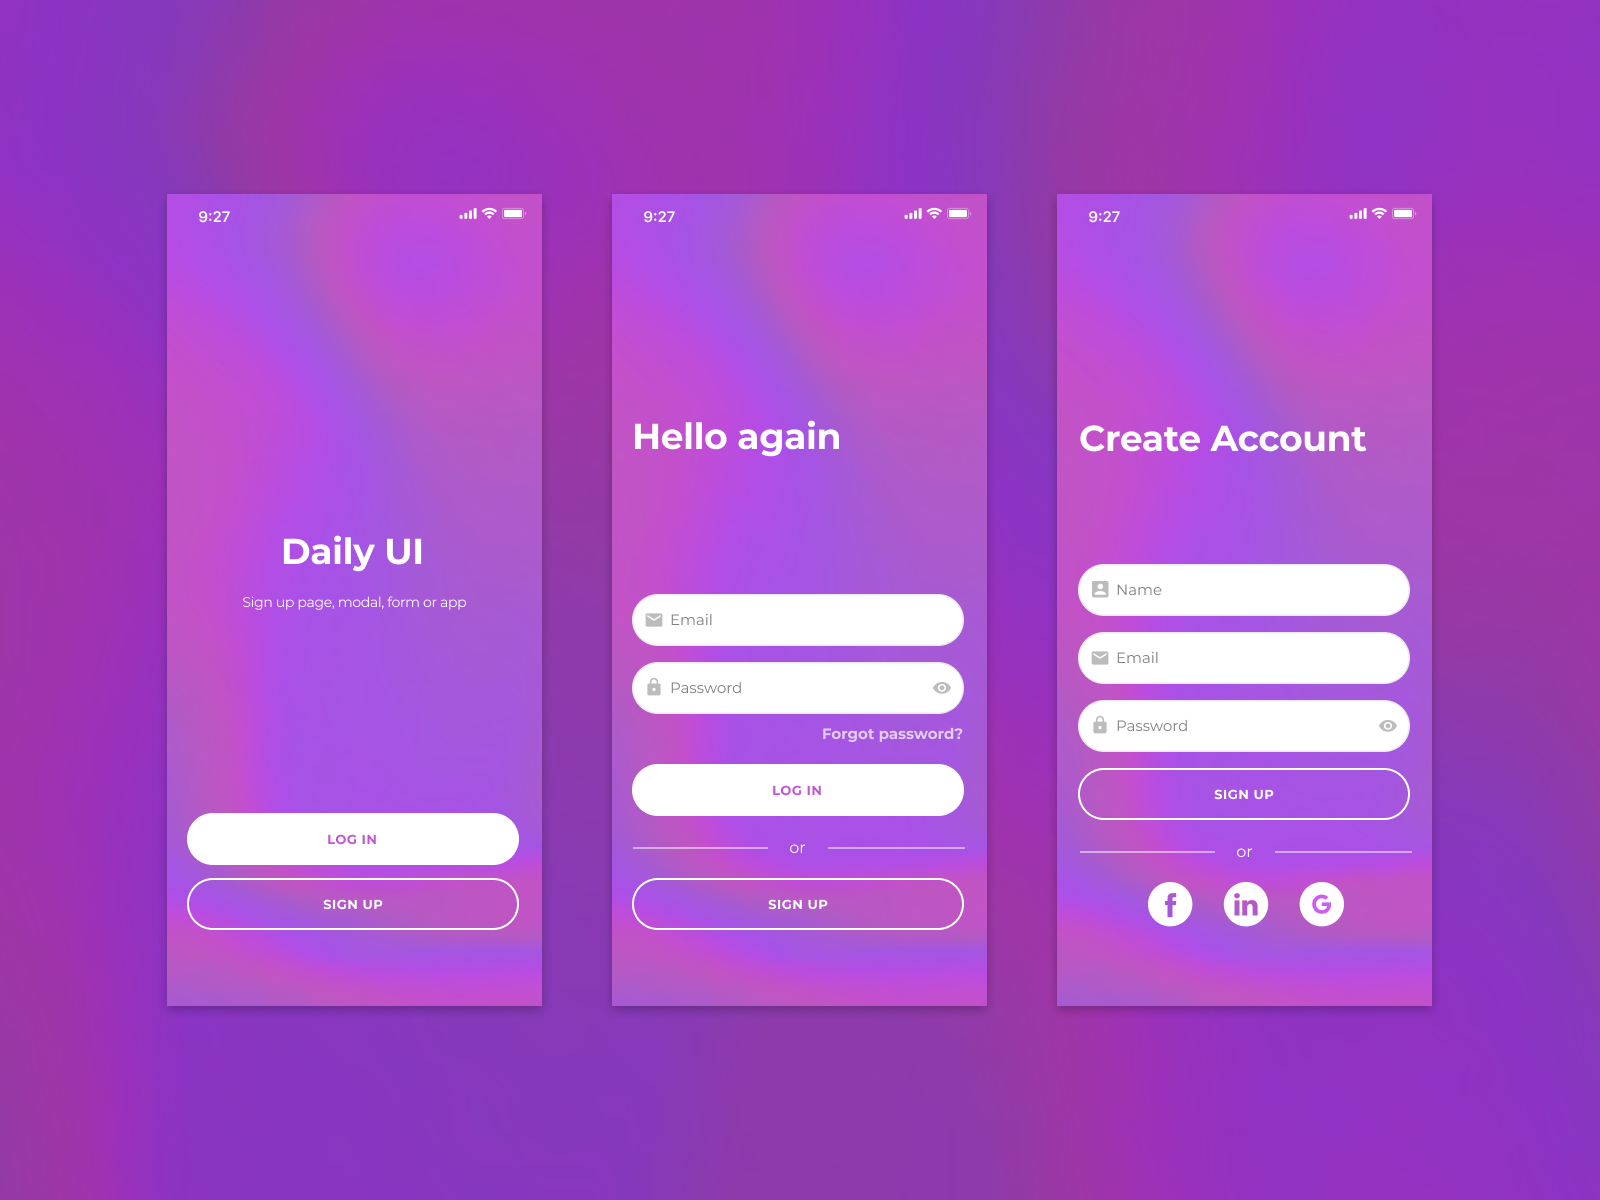 Daily UI Sign Up by Zuzanna Suska on Dribbble